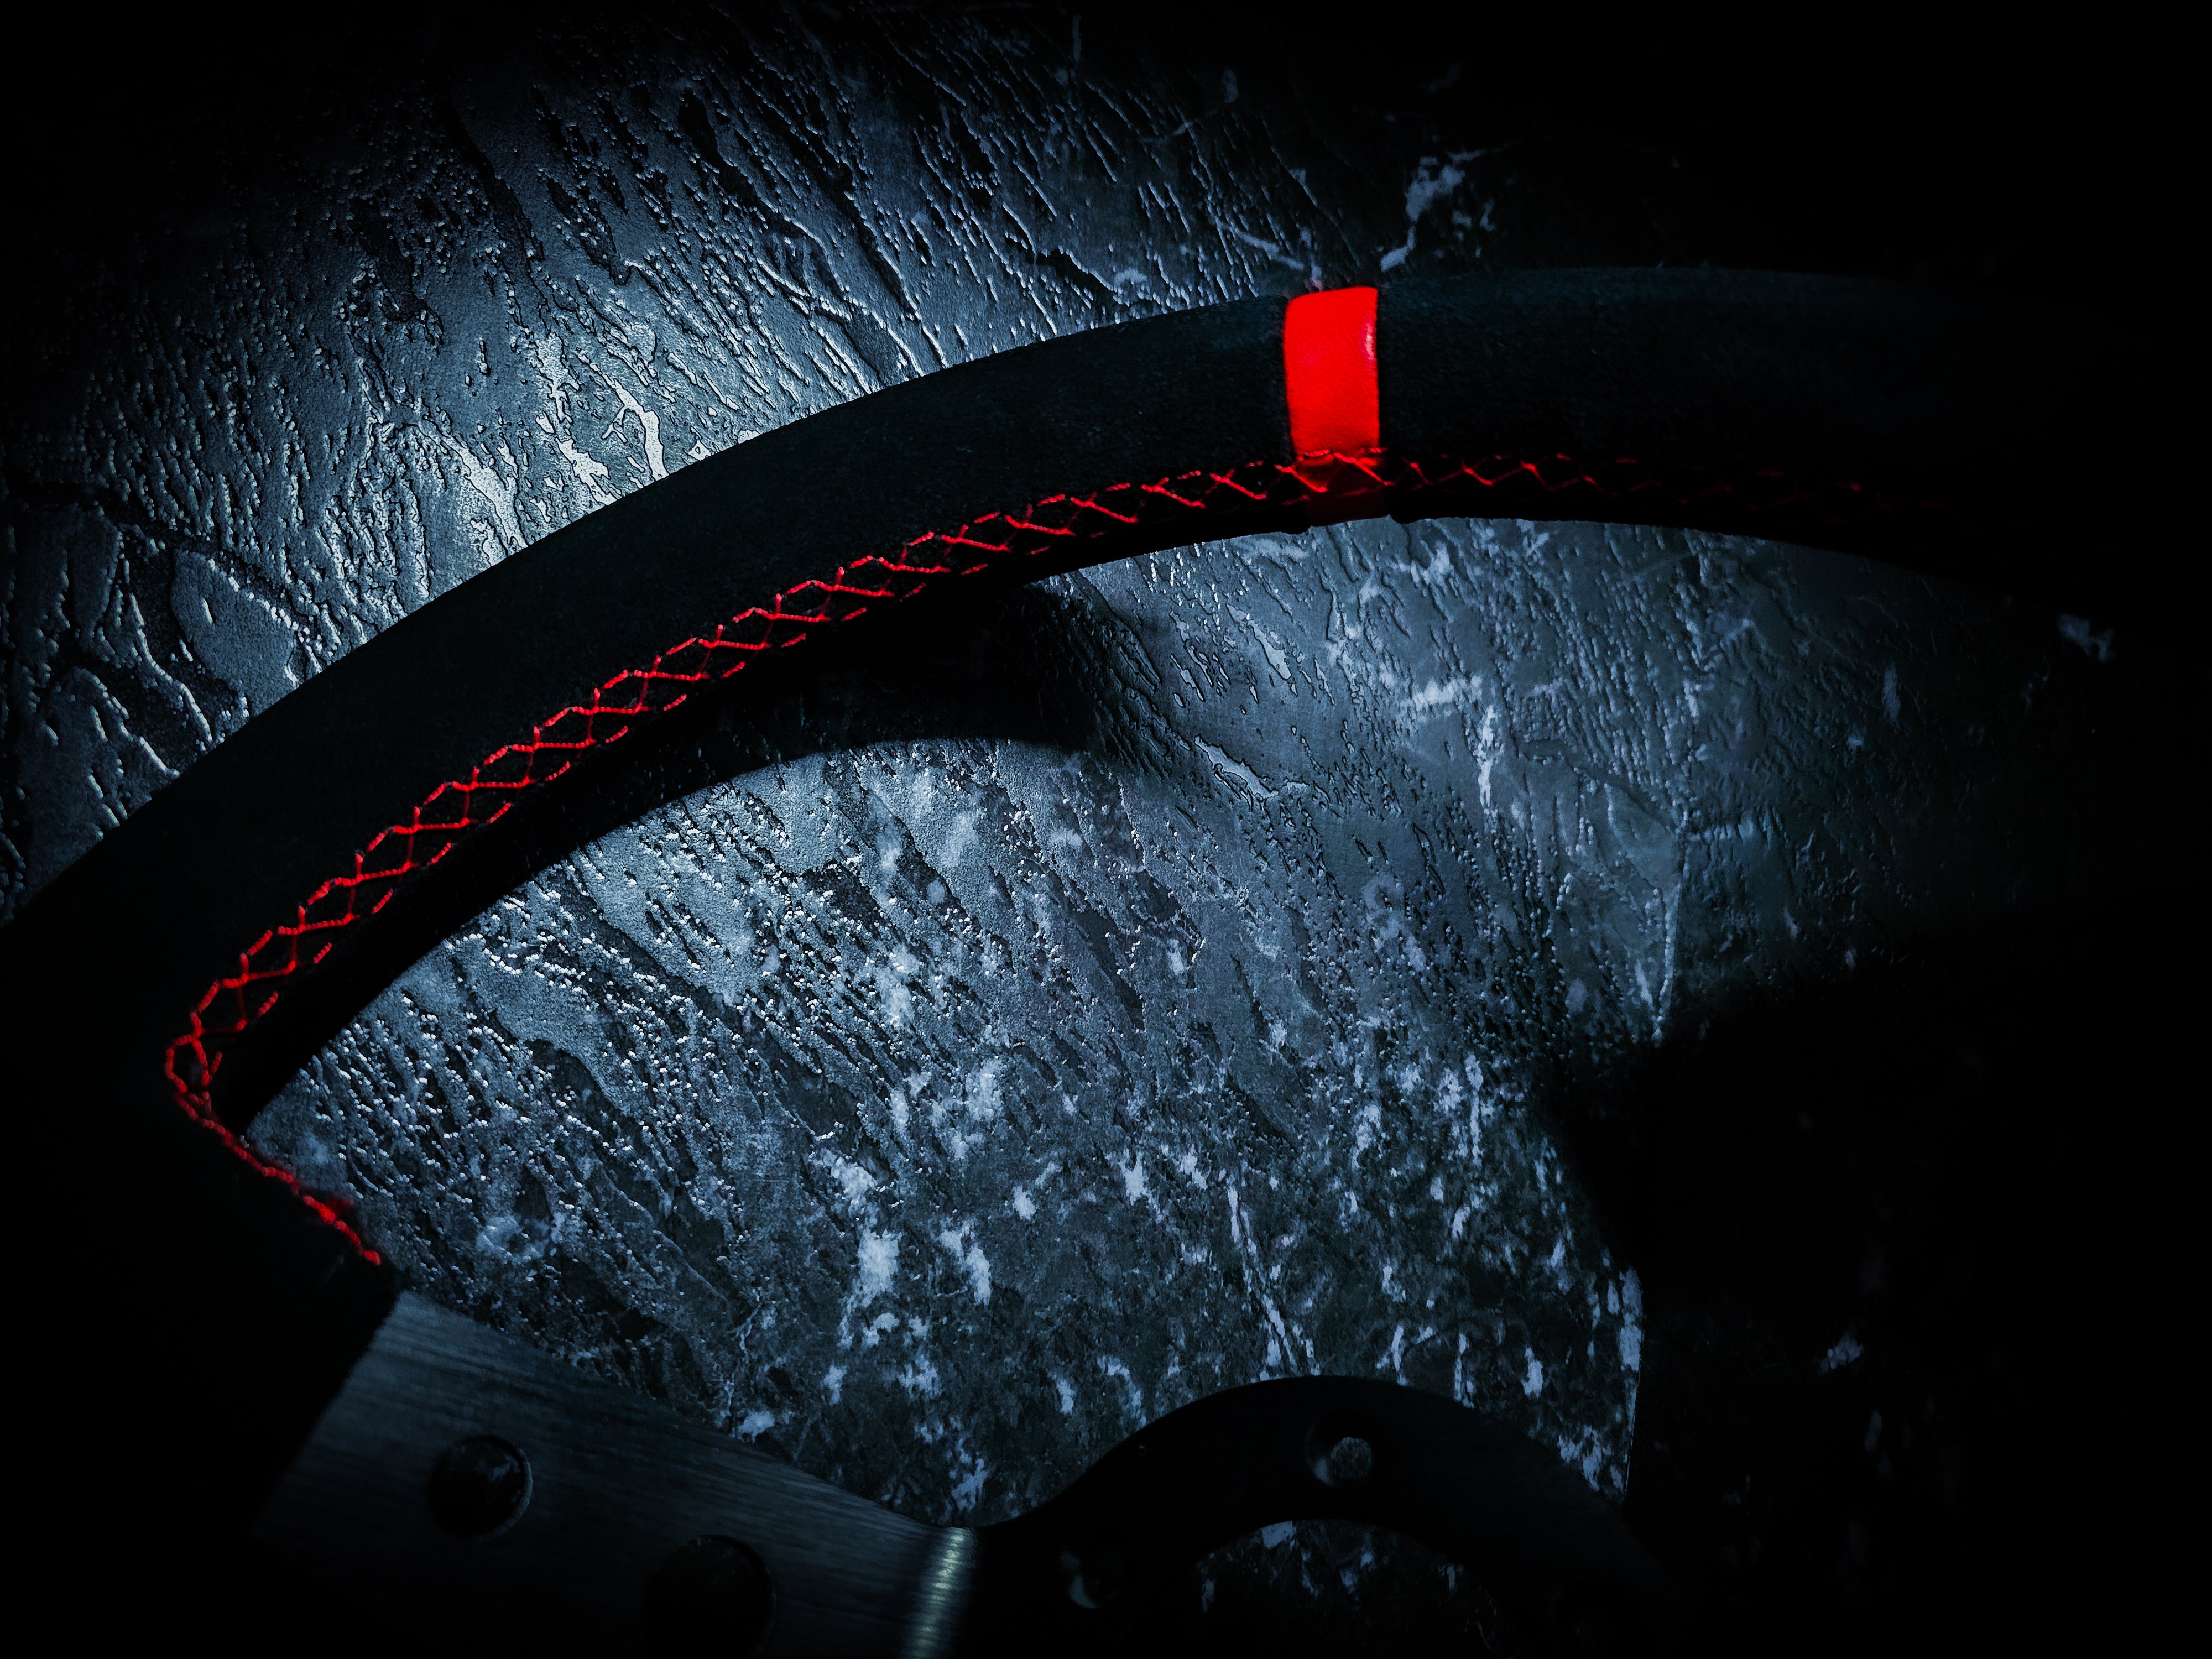 Black Red Lined And Stitched Deep Dished Suade Steering Wheel